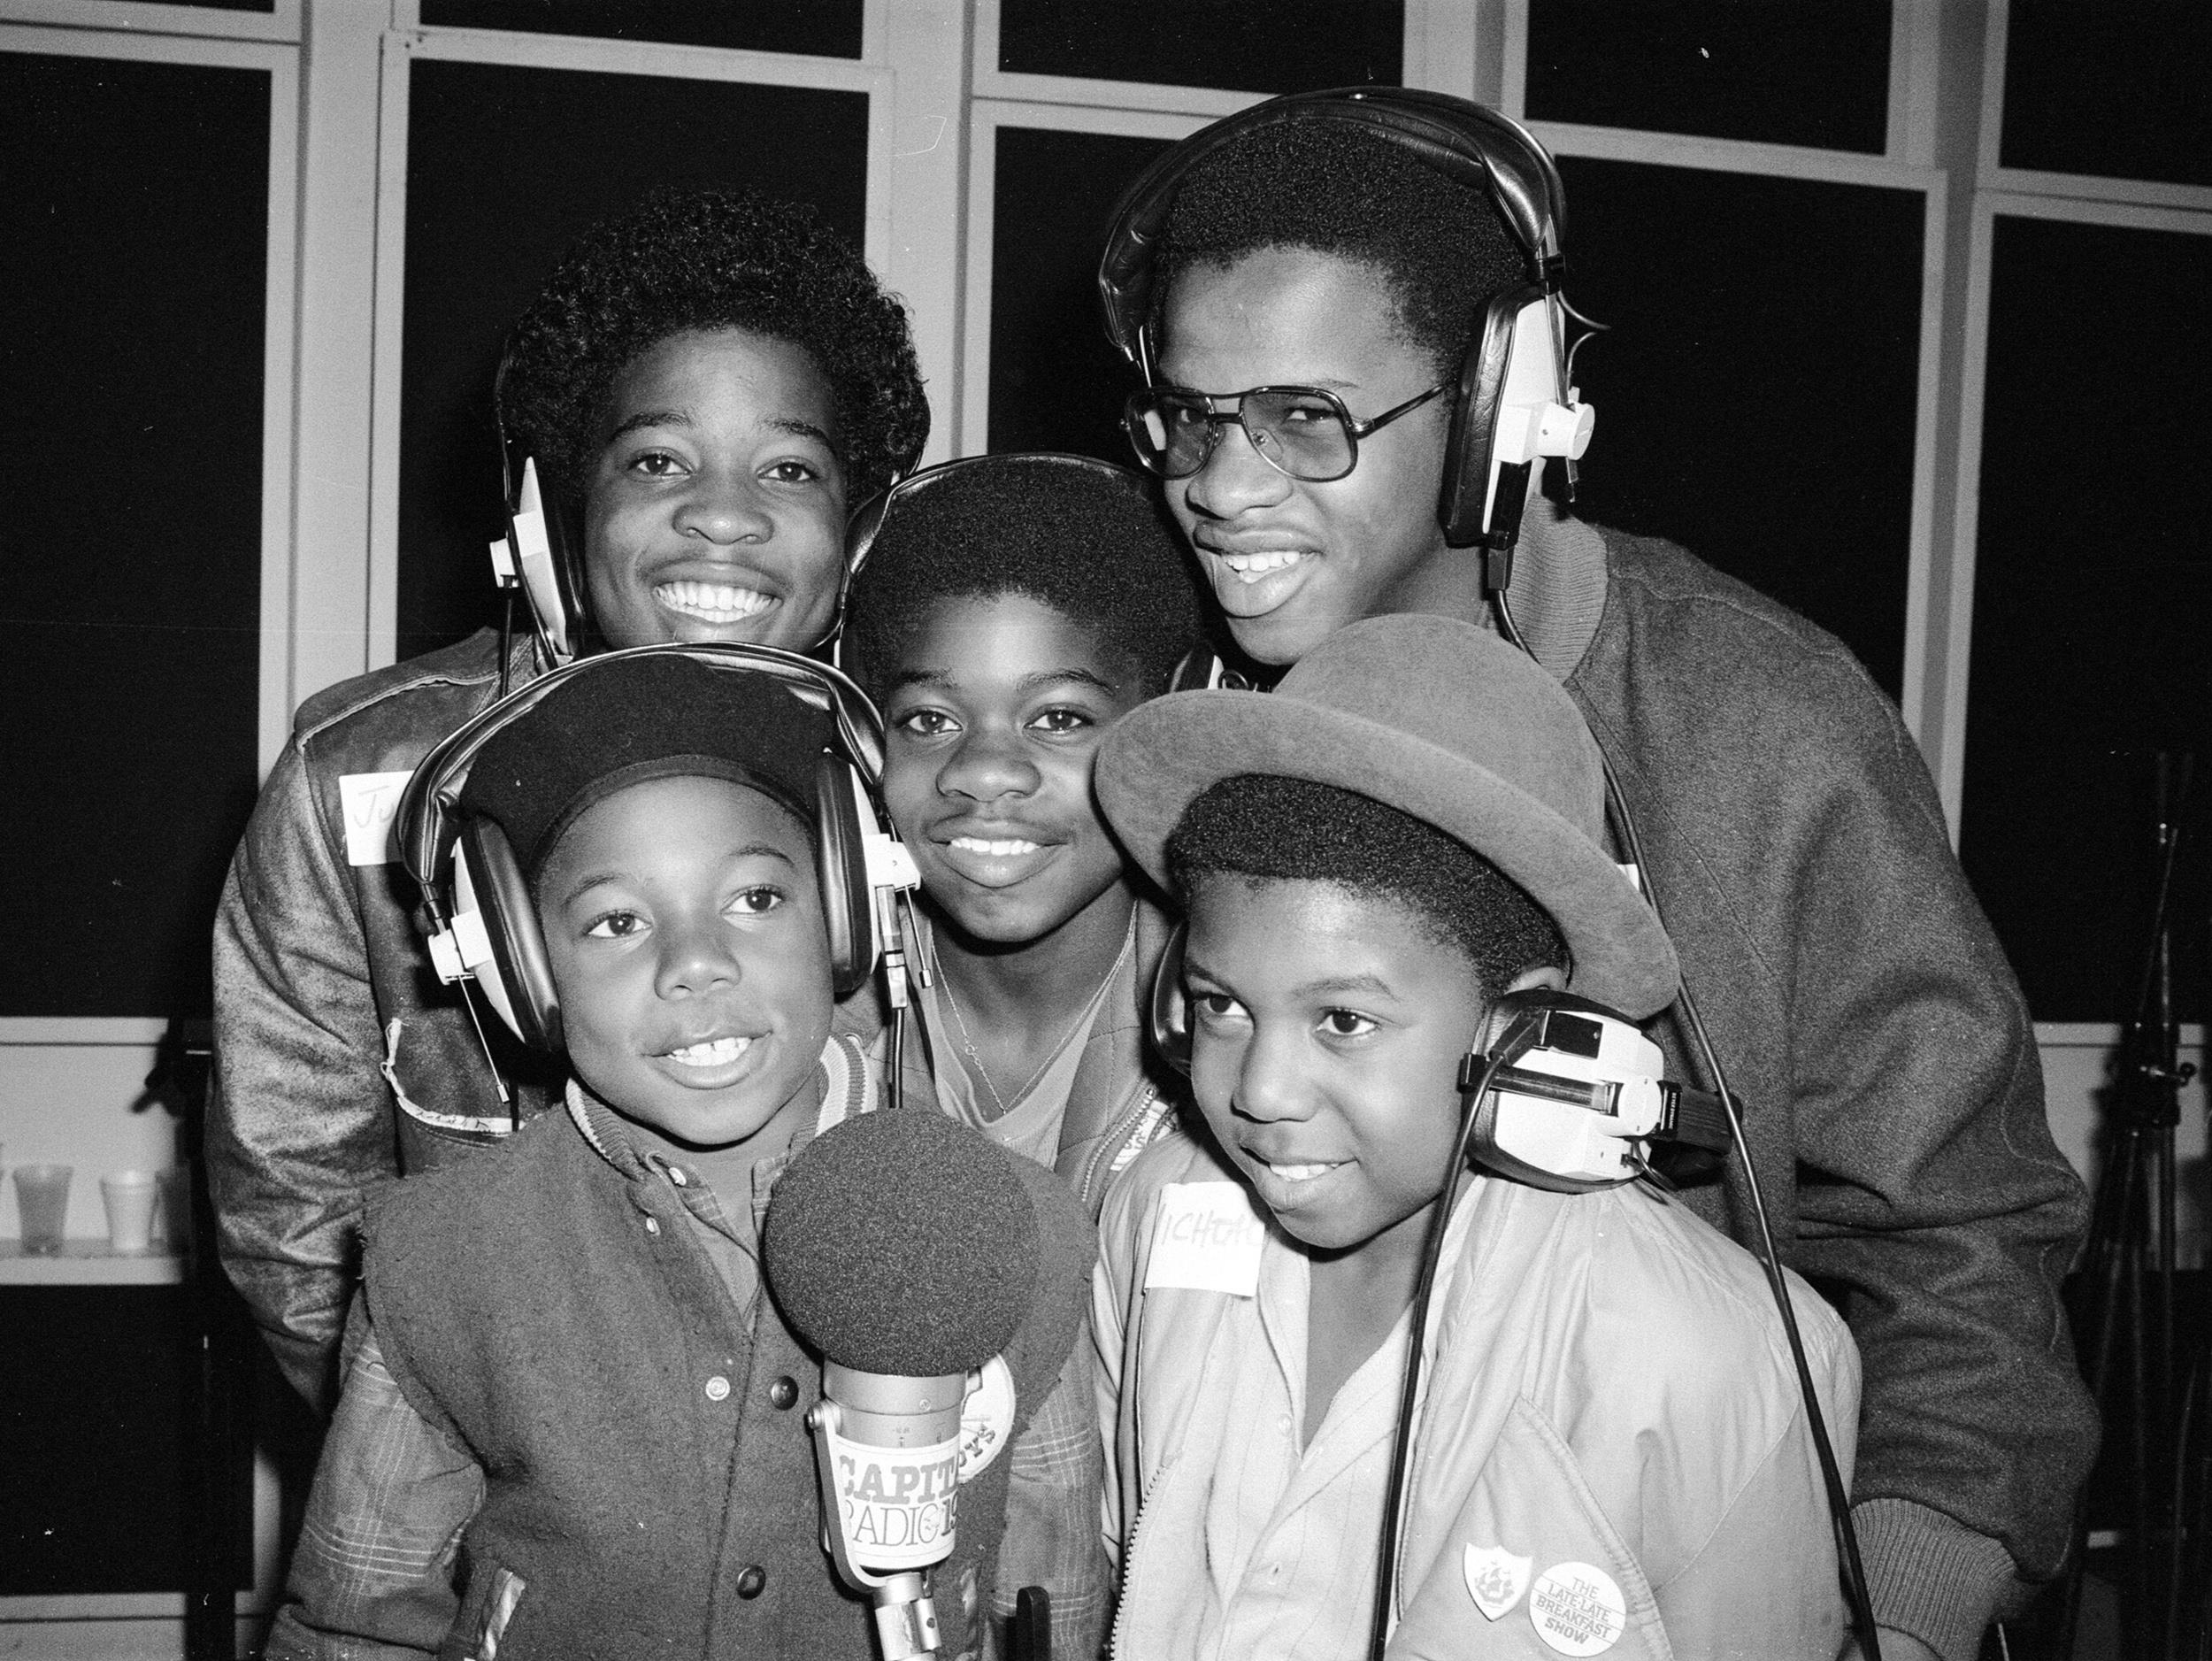 <p>Musical Youth was rather innovative for its time. A group of youngsters from England delivered a pop-reggae sound that was a breath of fresh air amid the new wave and pure pop offerings of the day. <a href="https://www.youtube.com/watch?v=dFtLONl4cNc">"Pass the Dutchie,"</a> a combination of U Brown's "Gimme the Music" and "Pass the Kouchie<span>" by </span>Mighty Diamonds<span>, did away with the drug references from the latter and replaced Kouchie with Dutchie, a form of a cooking pot. The tune hit No. 1 in 11 countries and peaked at No. 10 on the Hot 100.</span></p><p>You may also like: <a href='https://www.yardbarker.com/entertainment/articles/the_20_best_feminist_horror_movies/s1__40212626'>The 20 best feminist horror movies</a></p>